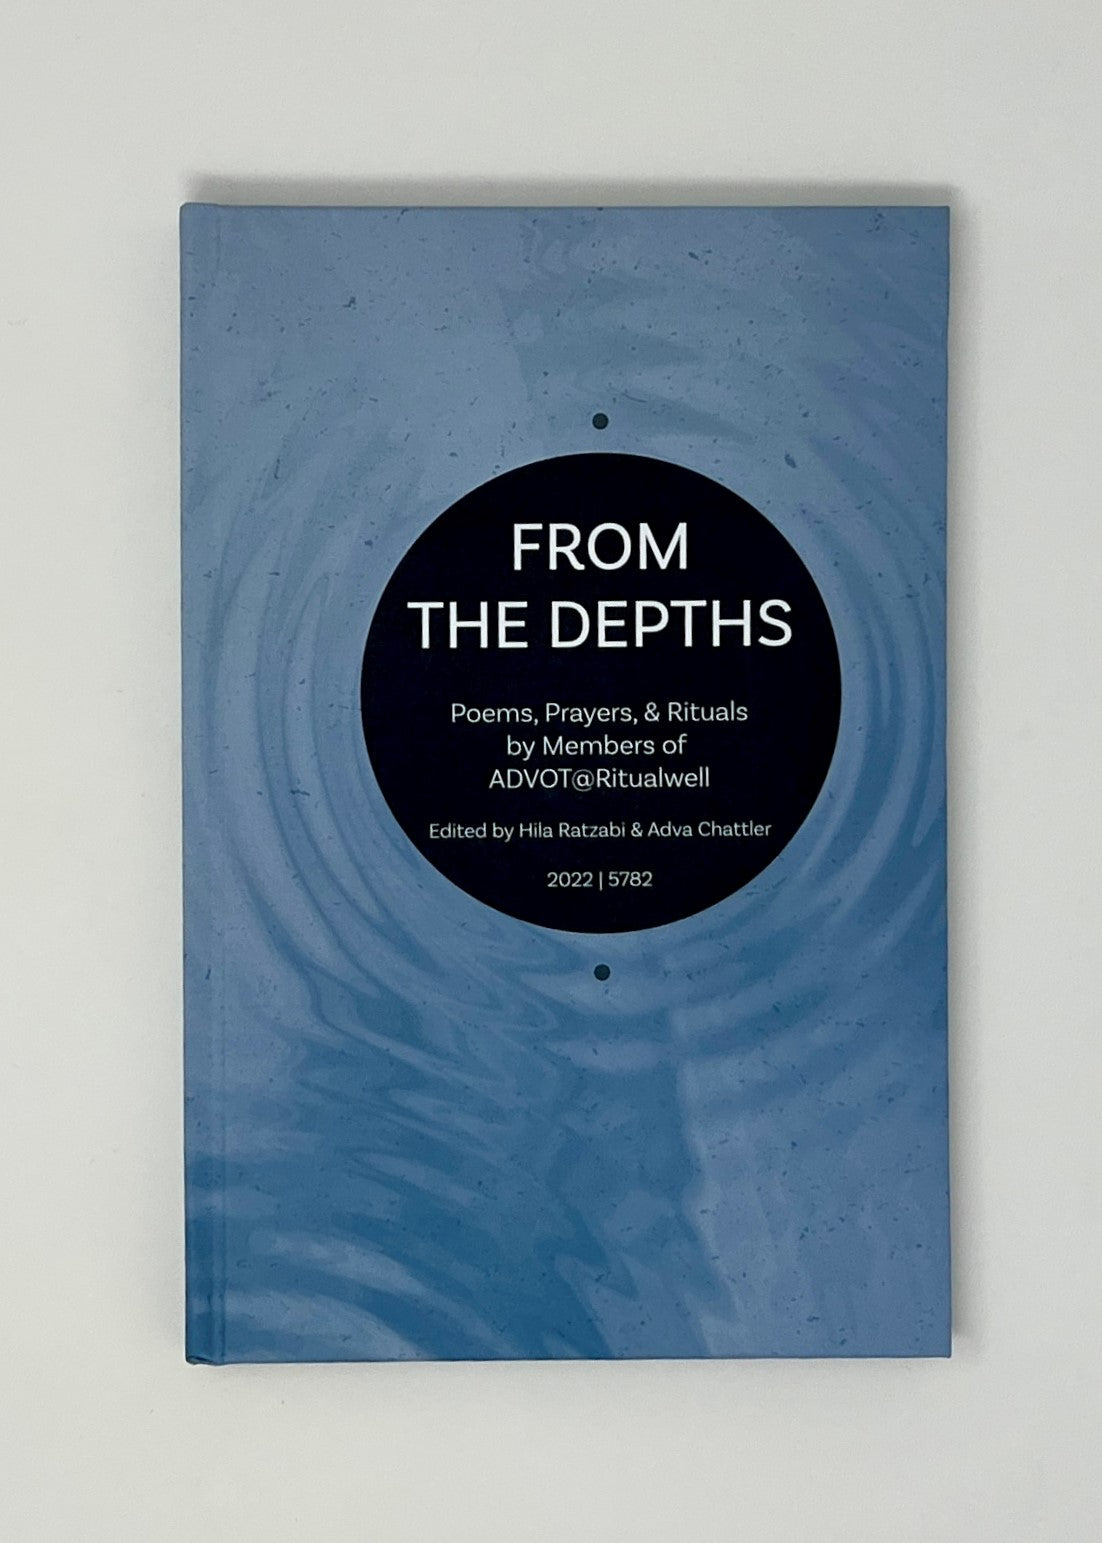 From the Depths: Poems, Prayers, & Rituals by Members of ADVOT@Ritualwell (2022/5782)